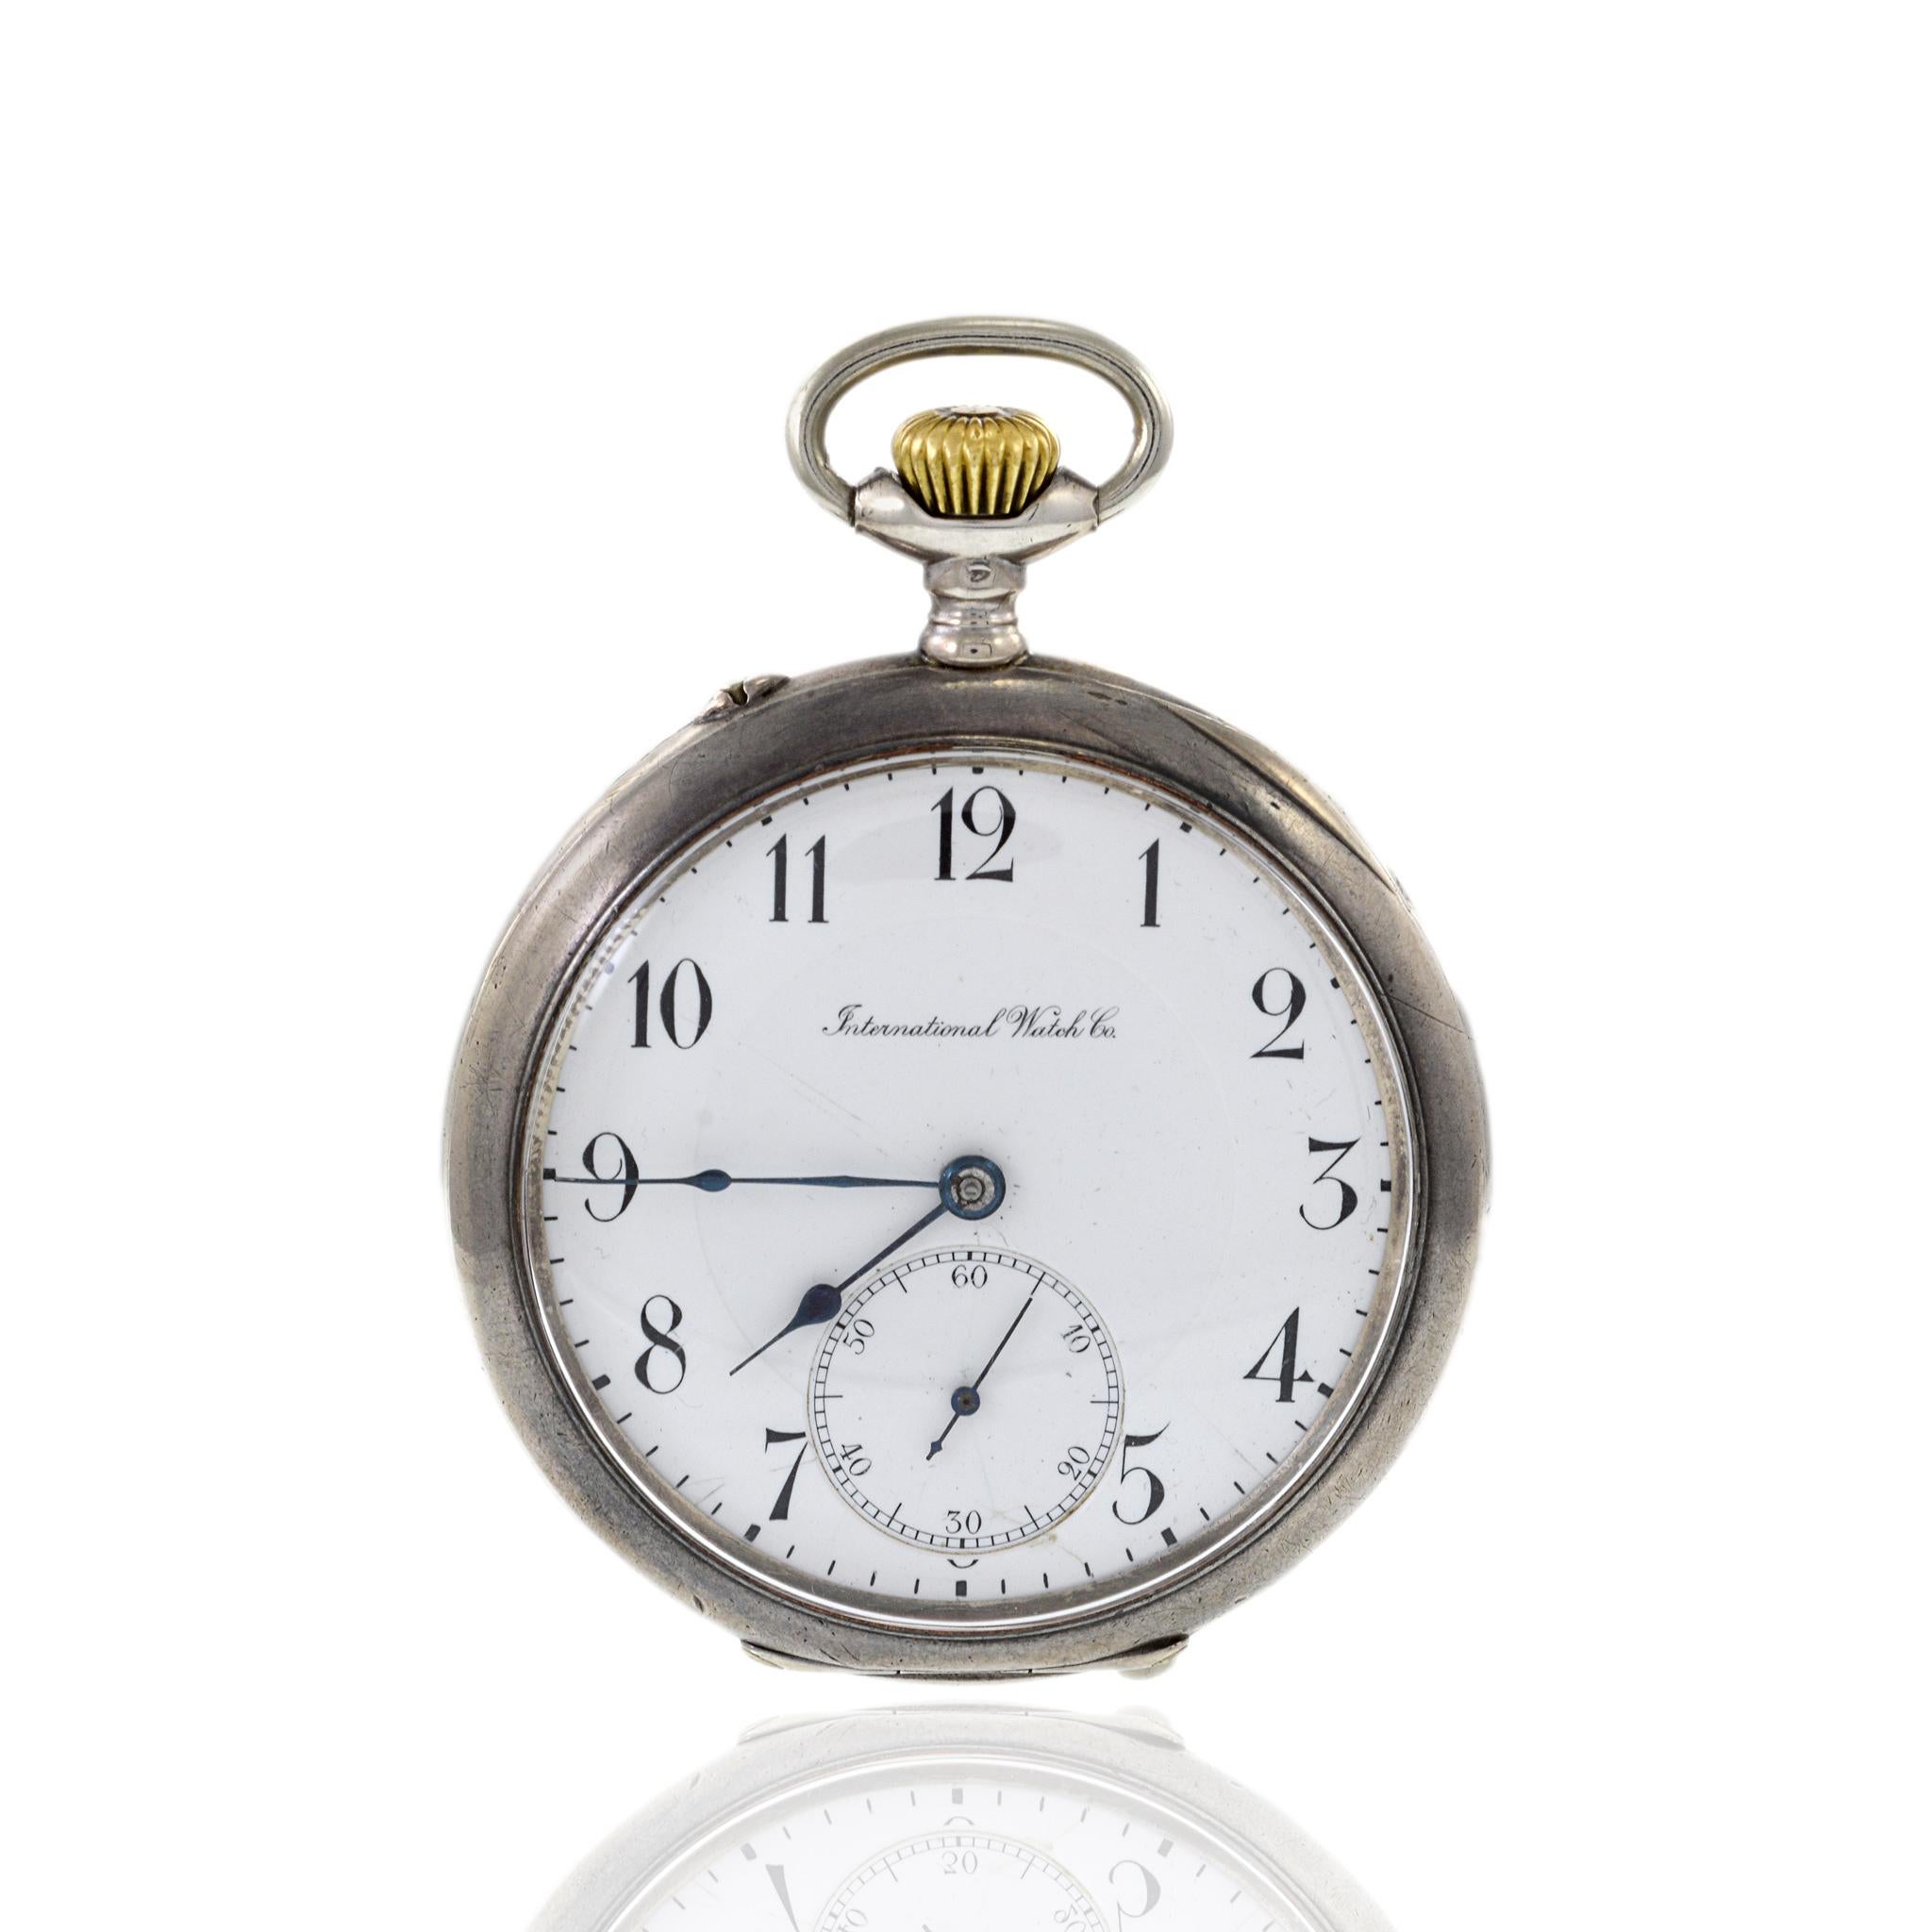 Introducing an exquisite piece of horological history, the IWC Pocket Watch from the year 1915. This timeless timepiece boasts a 52mm 800 silver case, reflecting the craftsmanship and elegance of the early 20th century. This watch watch manufactured